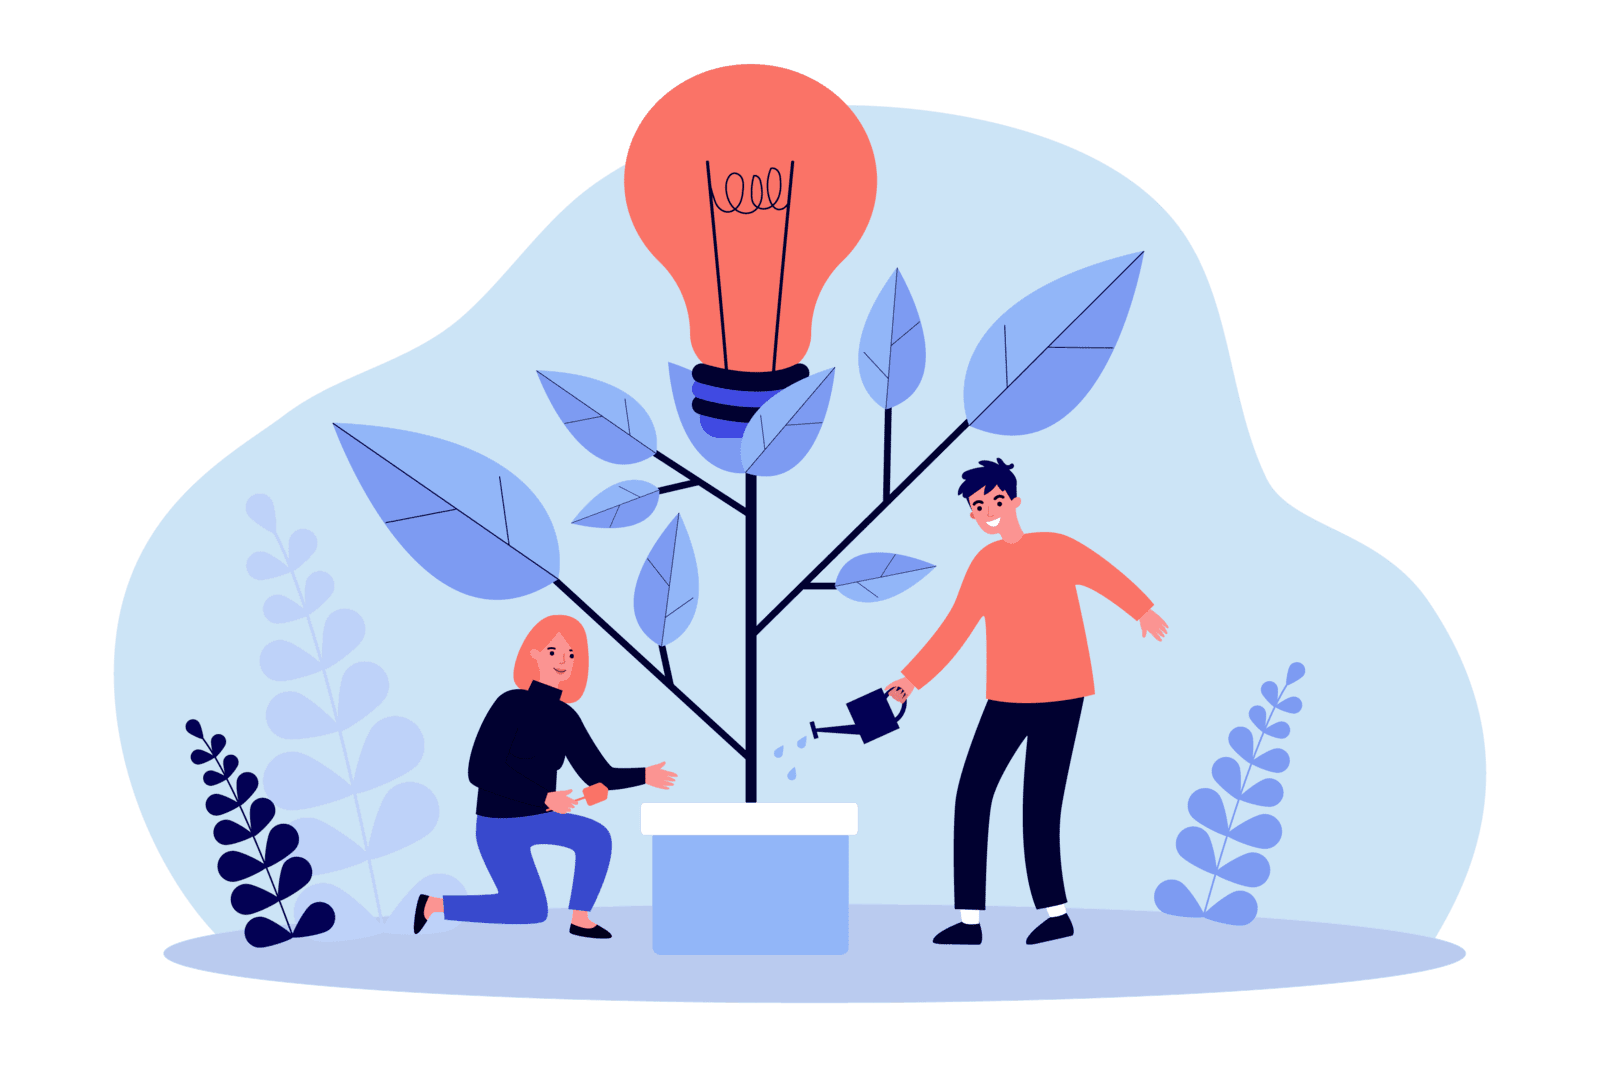 two people watering a tree that has a lightbulb at the top